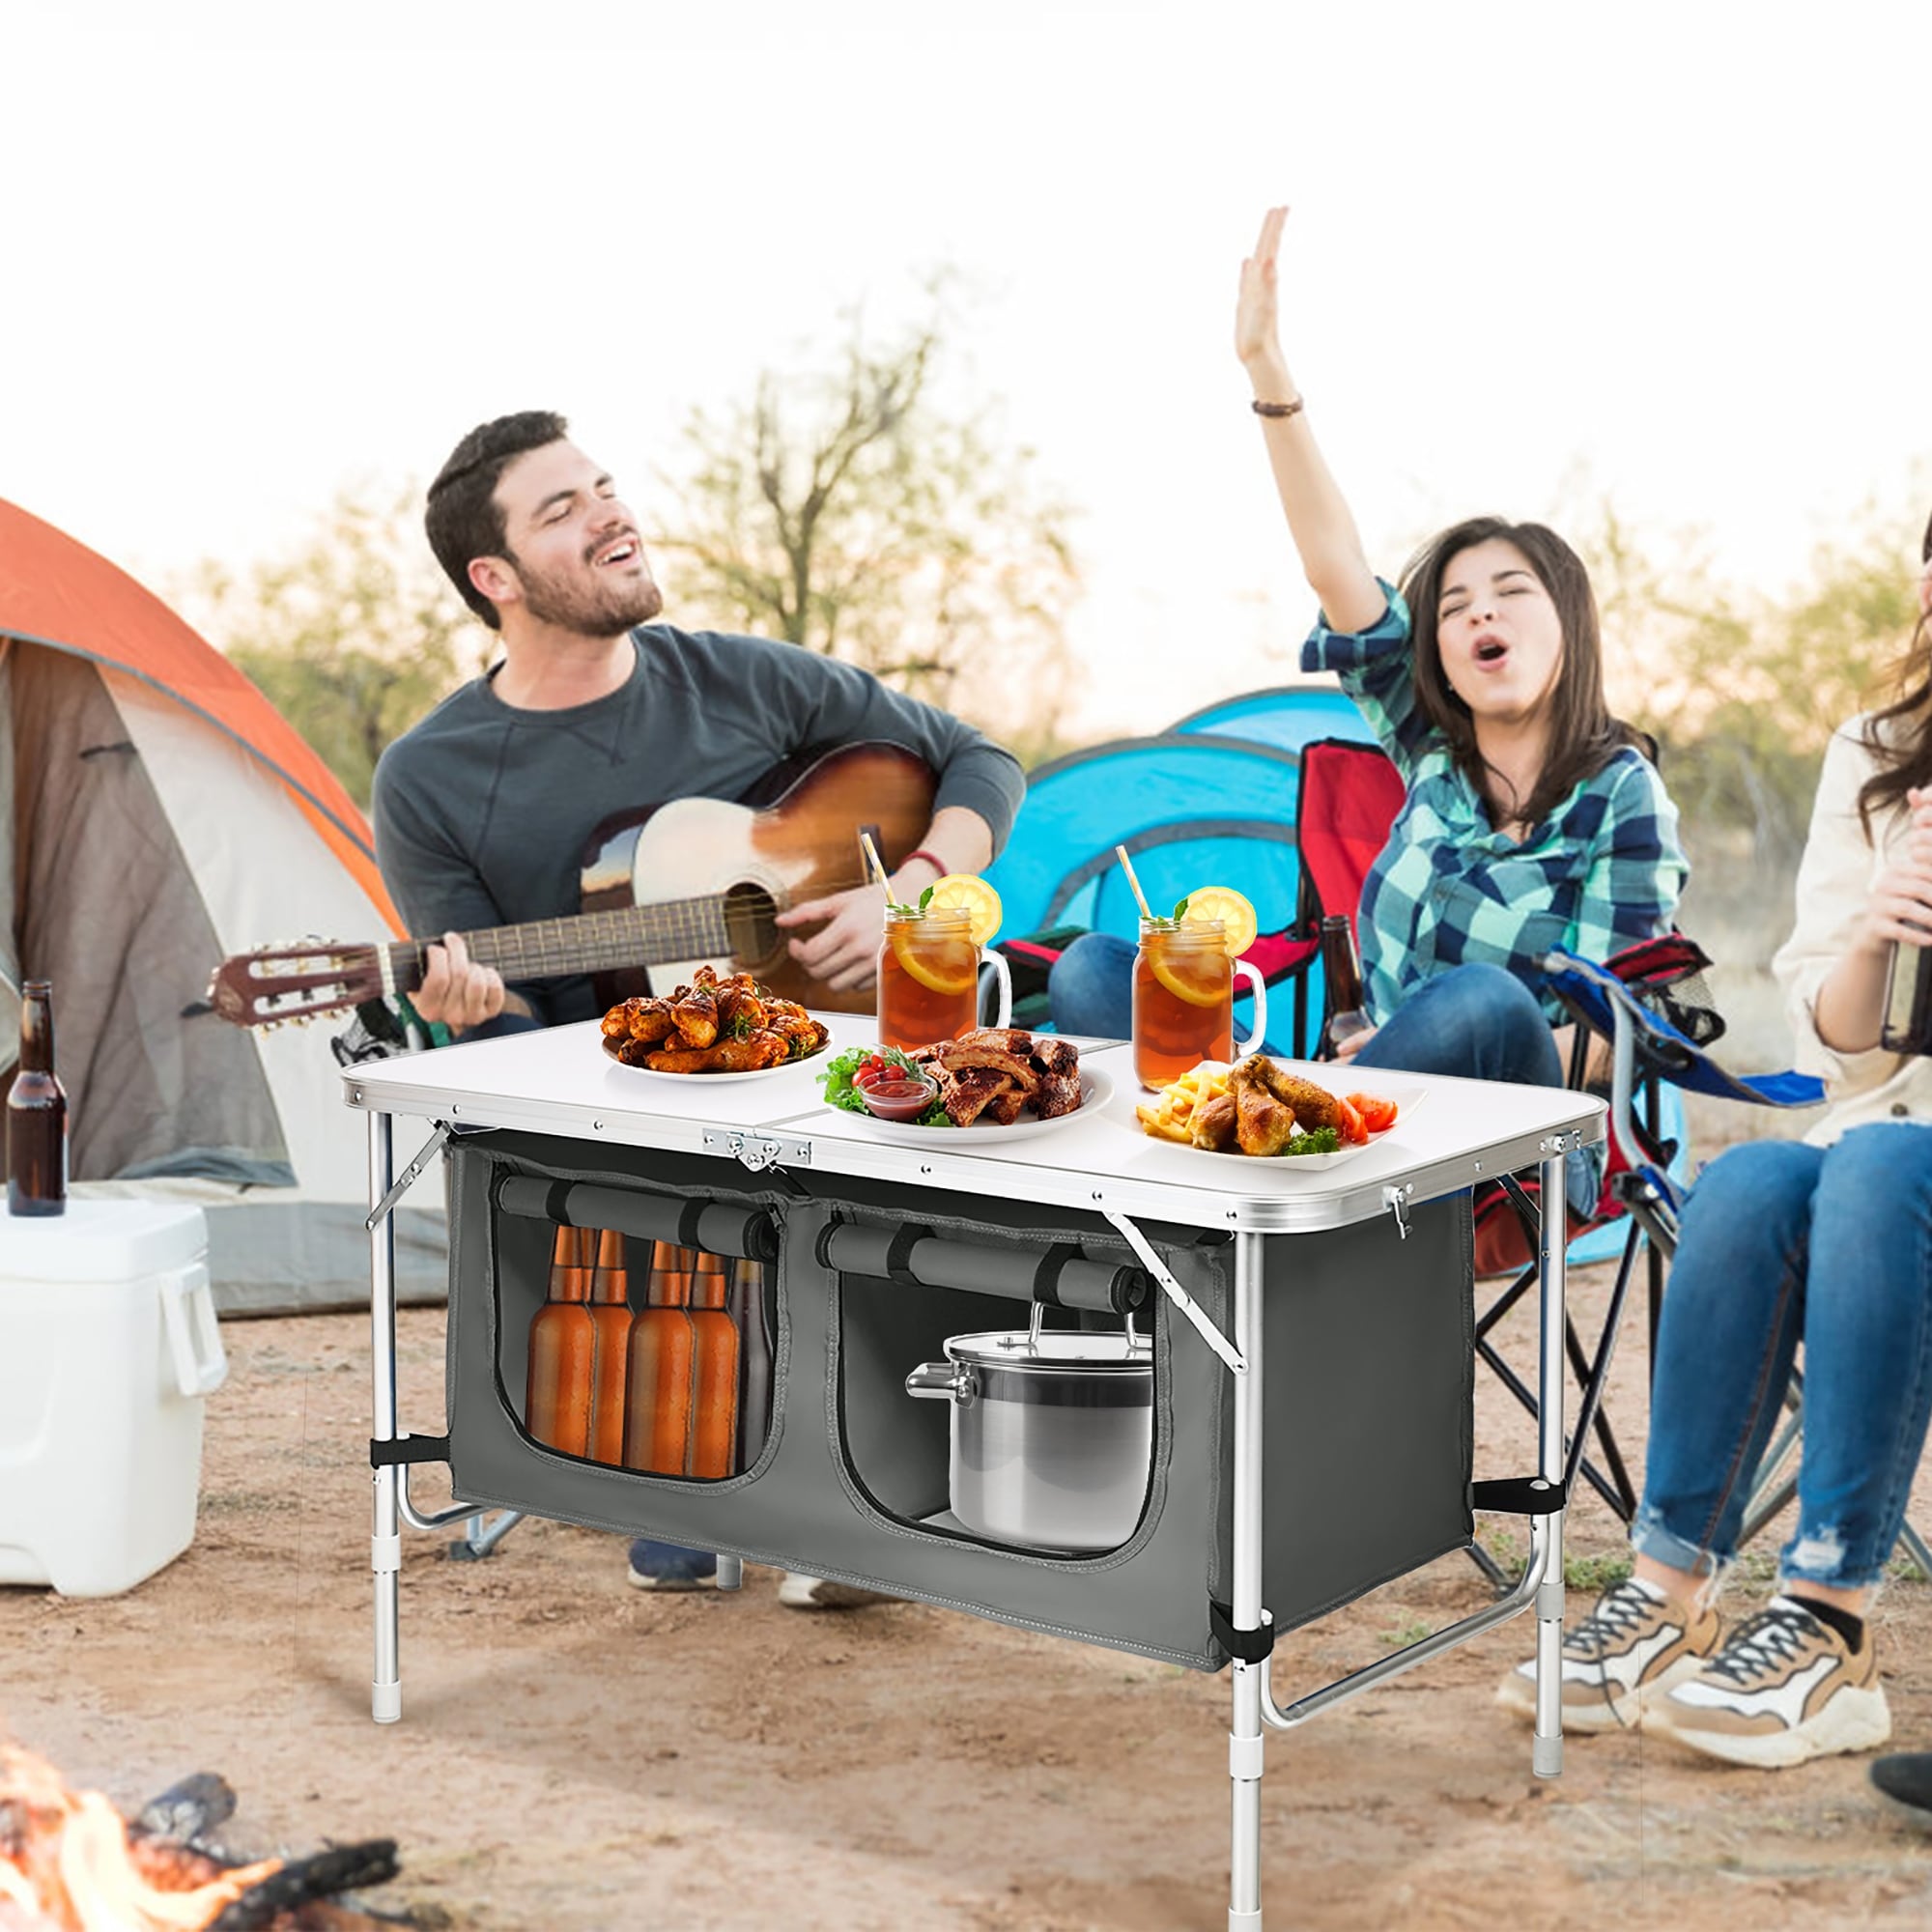 https://ak1.ostkcdn.com/images/products/is/images/direct/be6602e2e89626db8910a33fe9abbf1e730b61d6/Aluminum-Lightweight-Portable-Camping-Table-with-Storage-Organizer.jpg